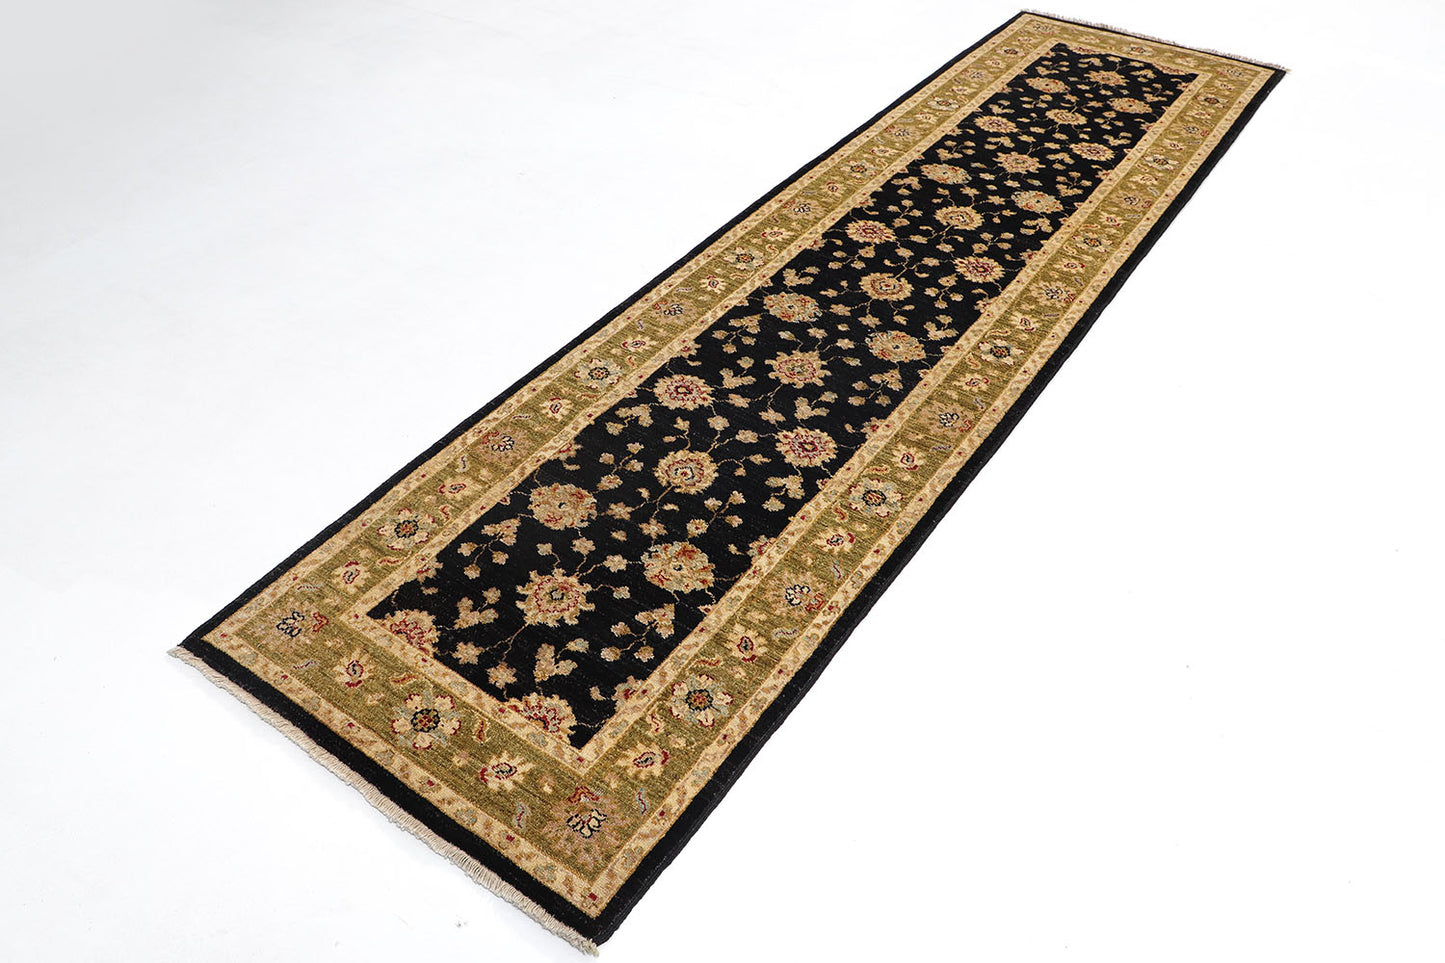 2.5x10 Hand-Knotted Ariana Carpet 2'.9" X 10'.1" Traditional, Black Fine Wool Runner Rug D40673